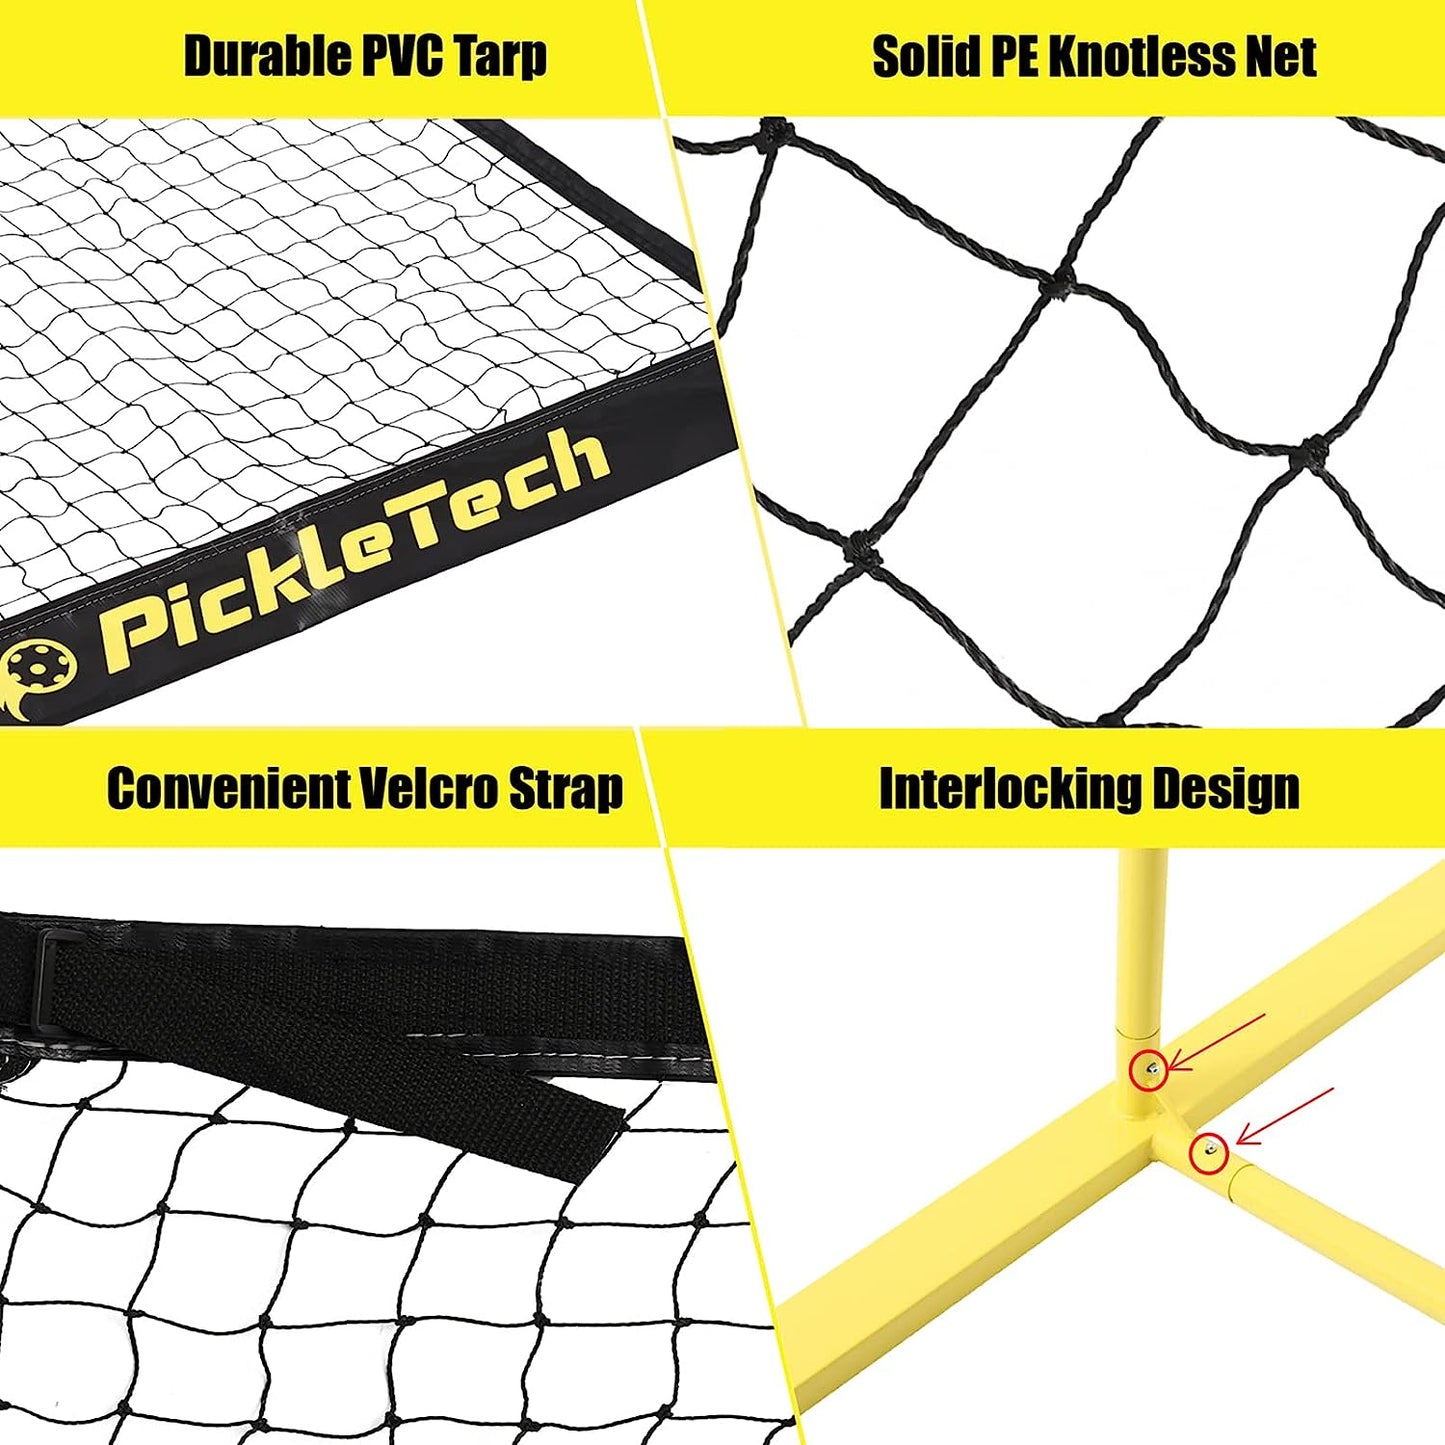 Black Yellow PICKLETECH 4.0 Slim Version Portable Pickleball Nets Outdoor or Indoor Game Black Yellow 22 FT Pickleball Net-USAPA Regulation Size-Pickle Ball Net System with Carrying Bag